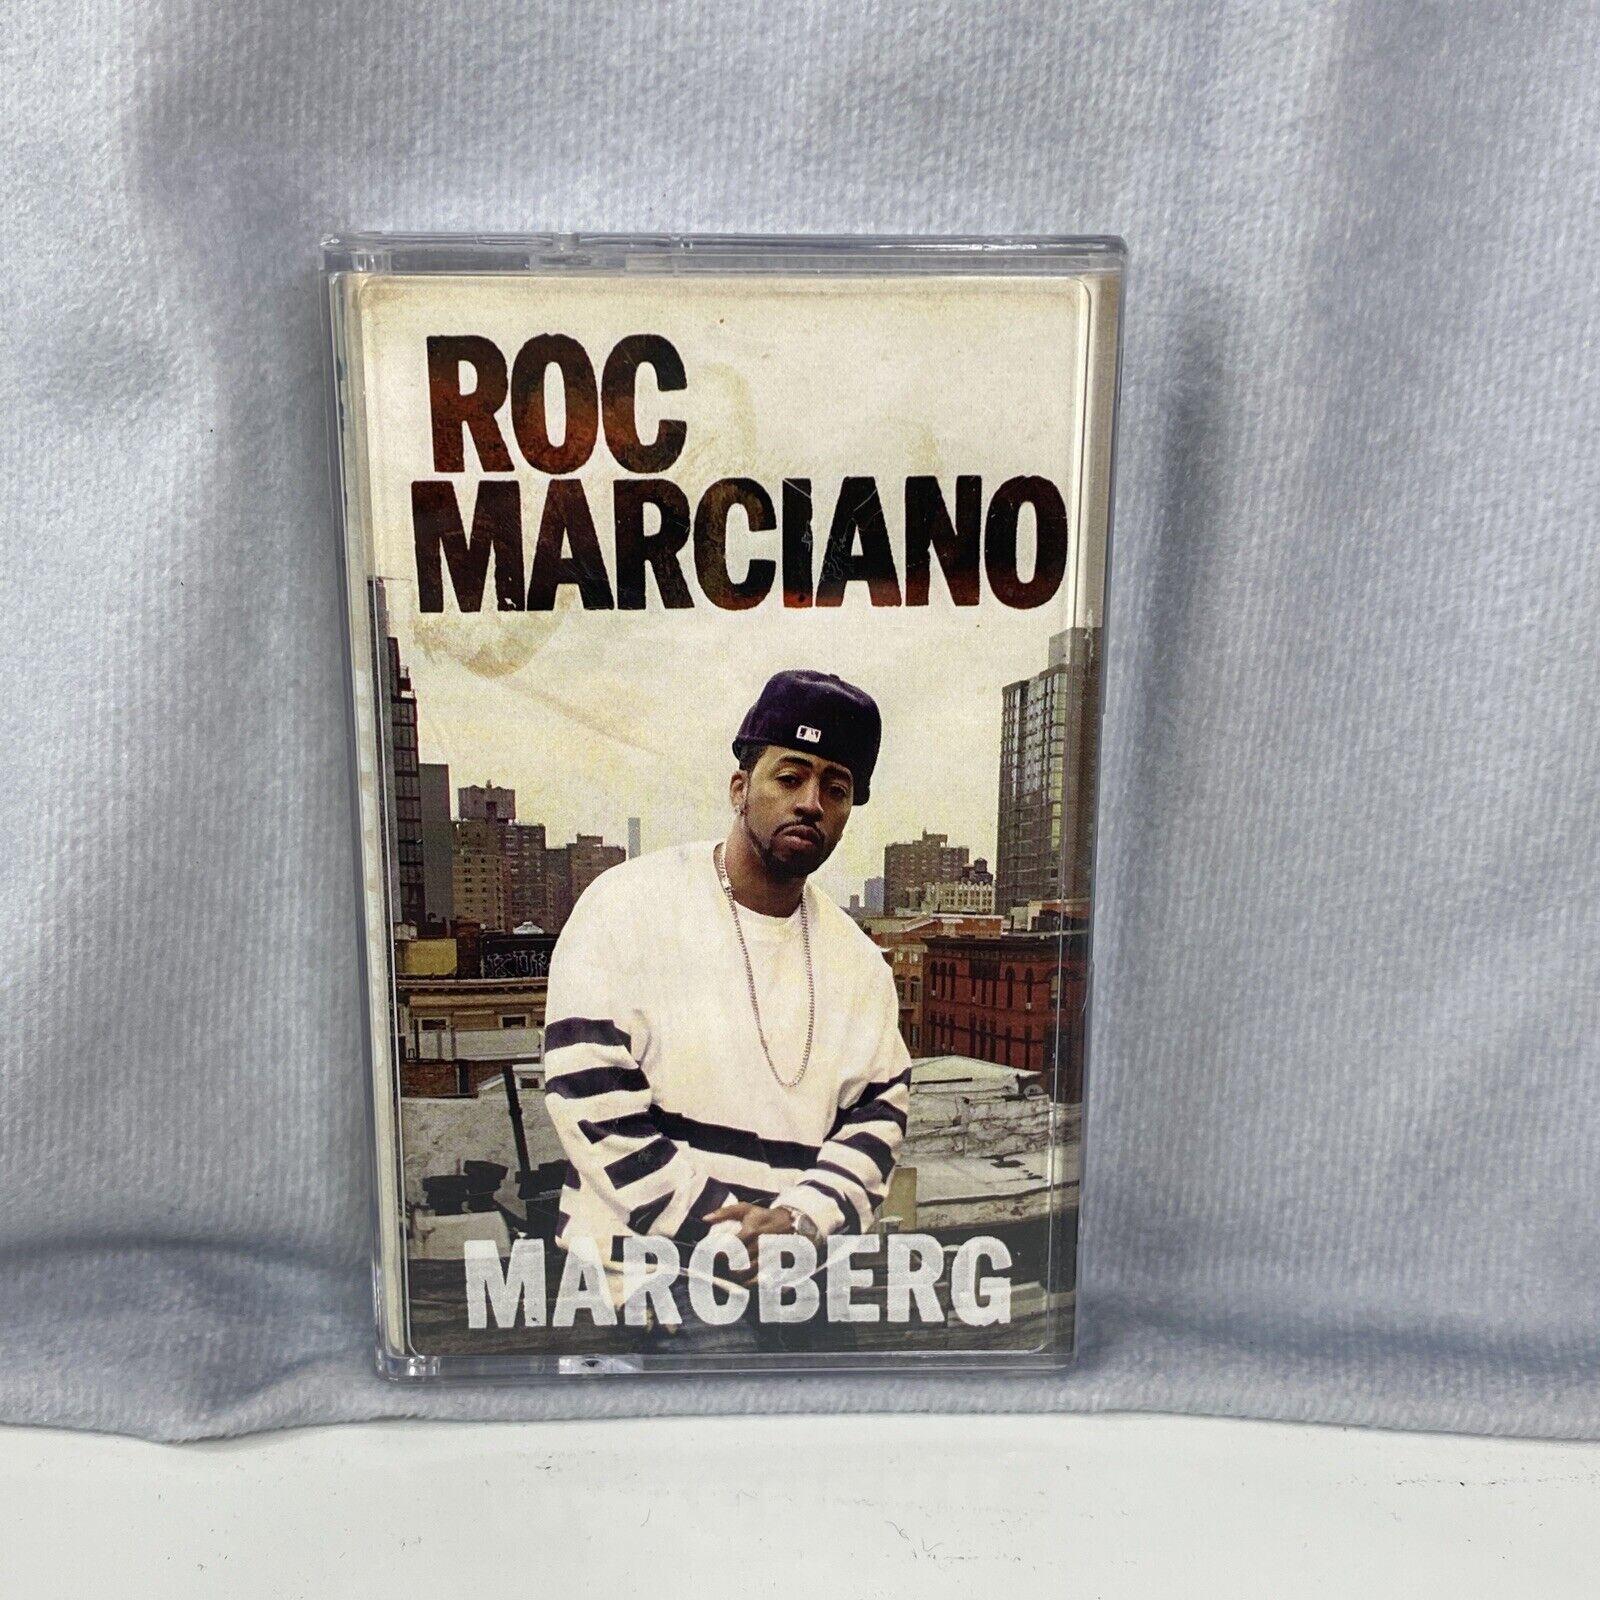 Roc Marciano Debut Cassette Tape 2012 Limited Edition #103/300 Marcberg